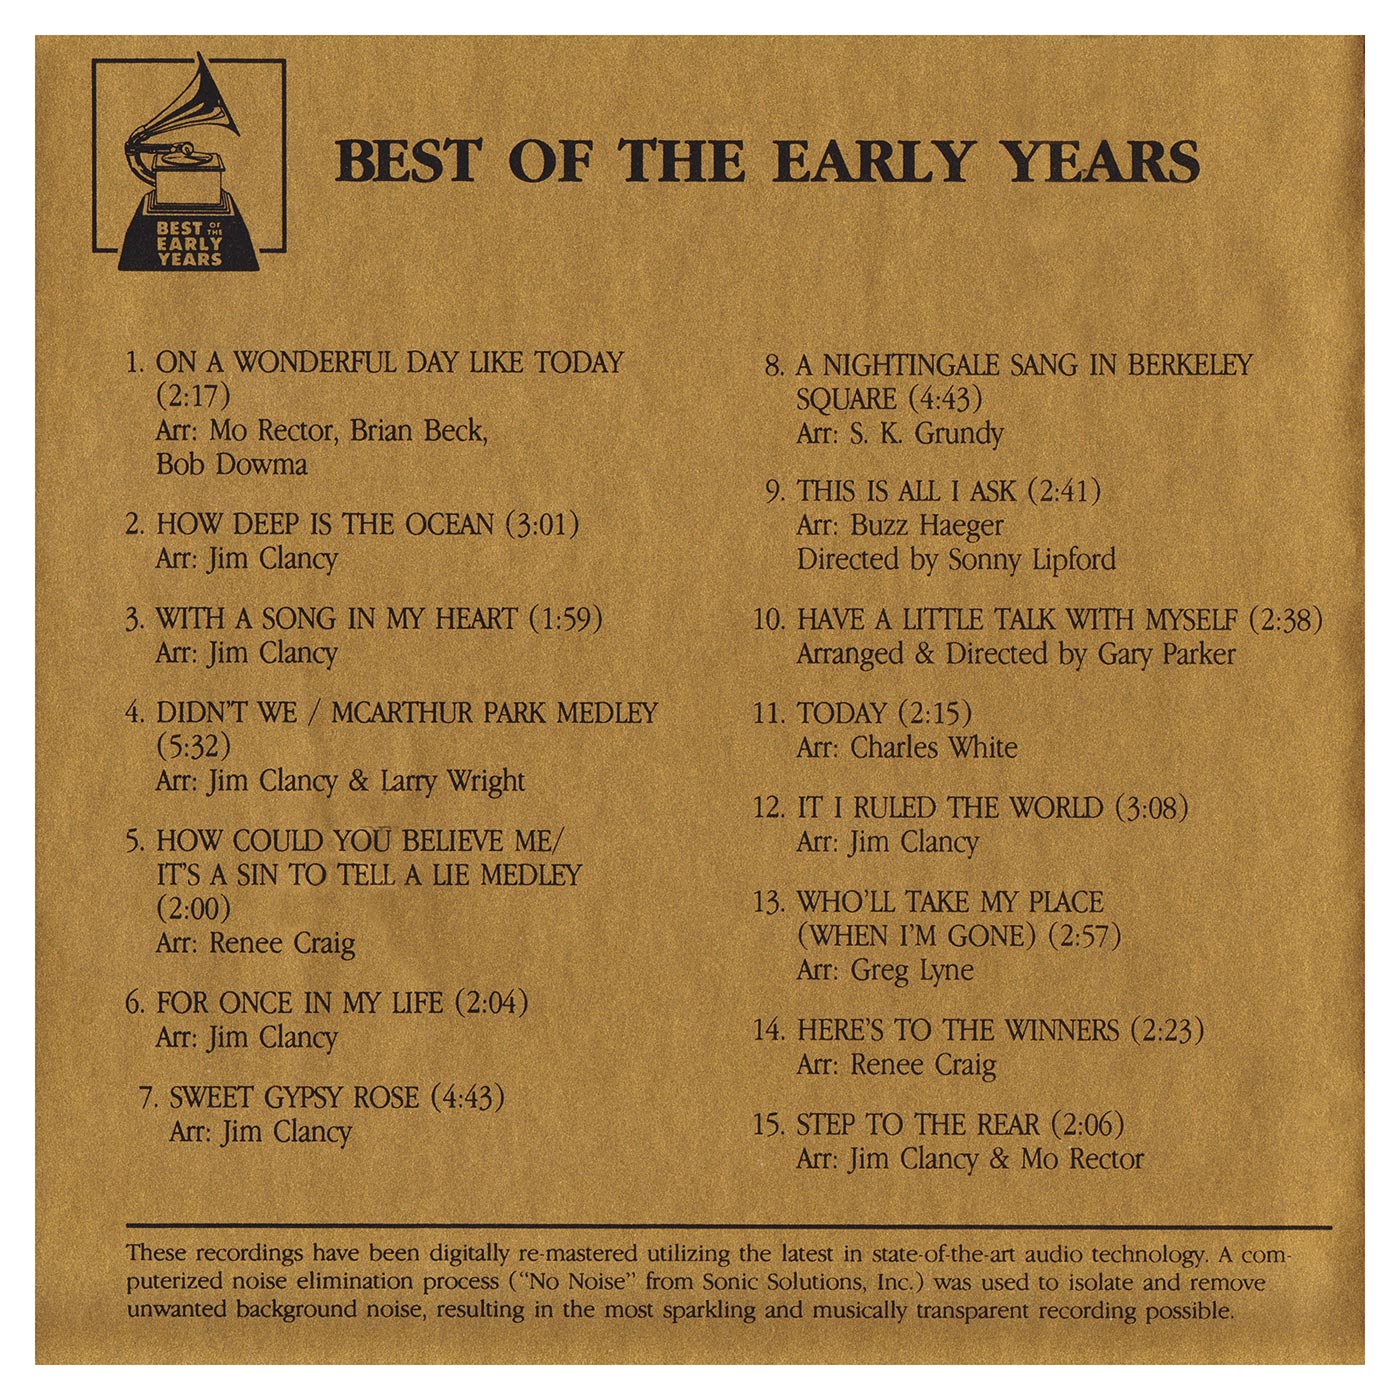 Booklet Outside Back Panel: Best of the Early Years